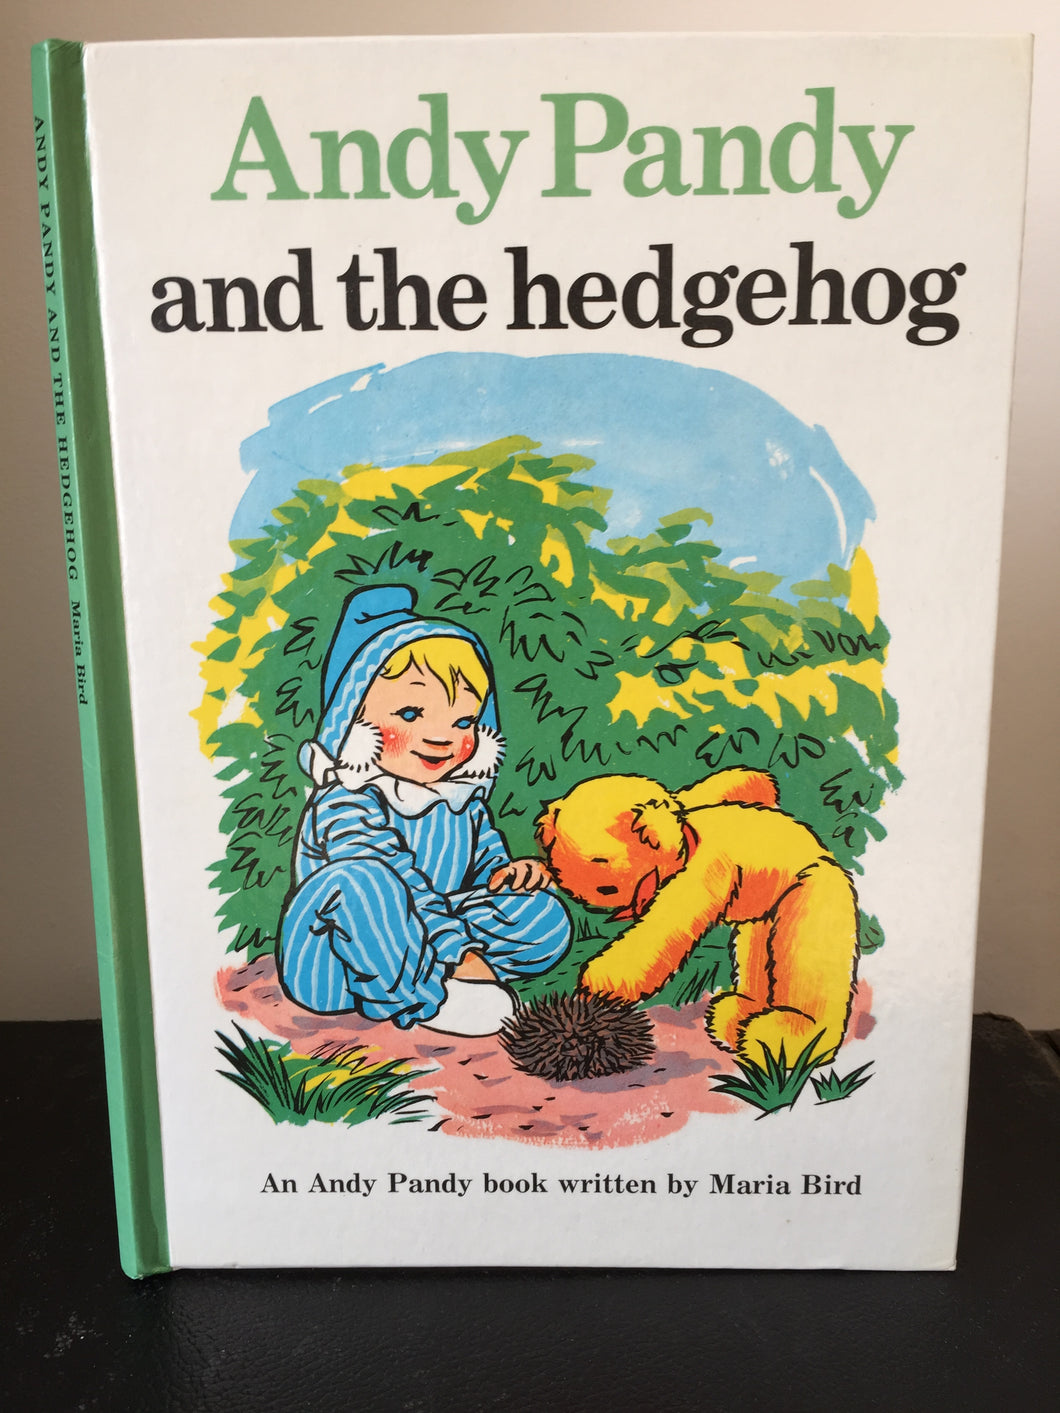 Andy Pandy and the Hedgehog